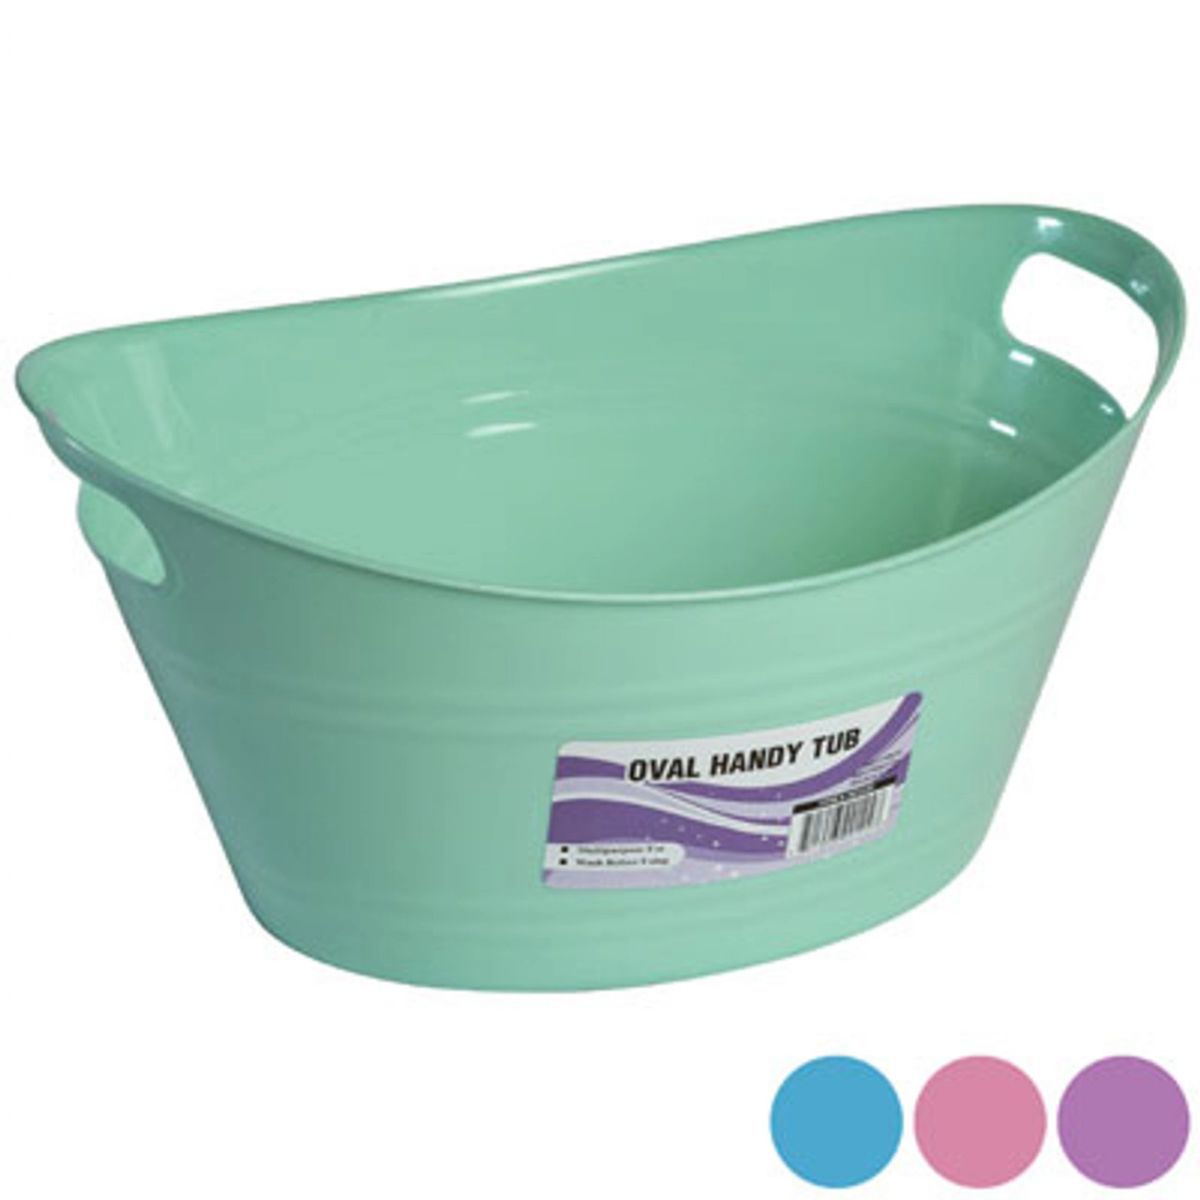 48 Pieces of Basket Oval Tub W/double Handles 5.25 X 12.5 -4 Colors In Pdq #oval Handy